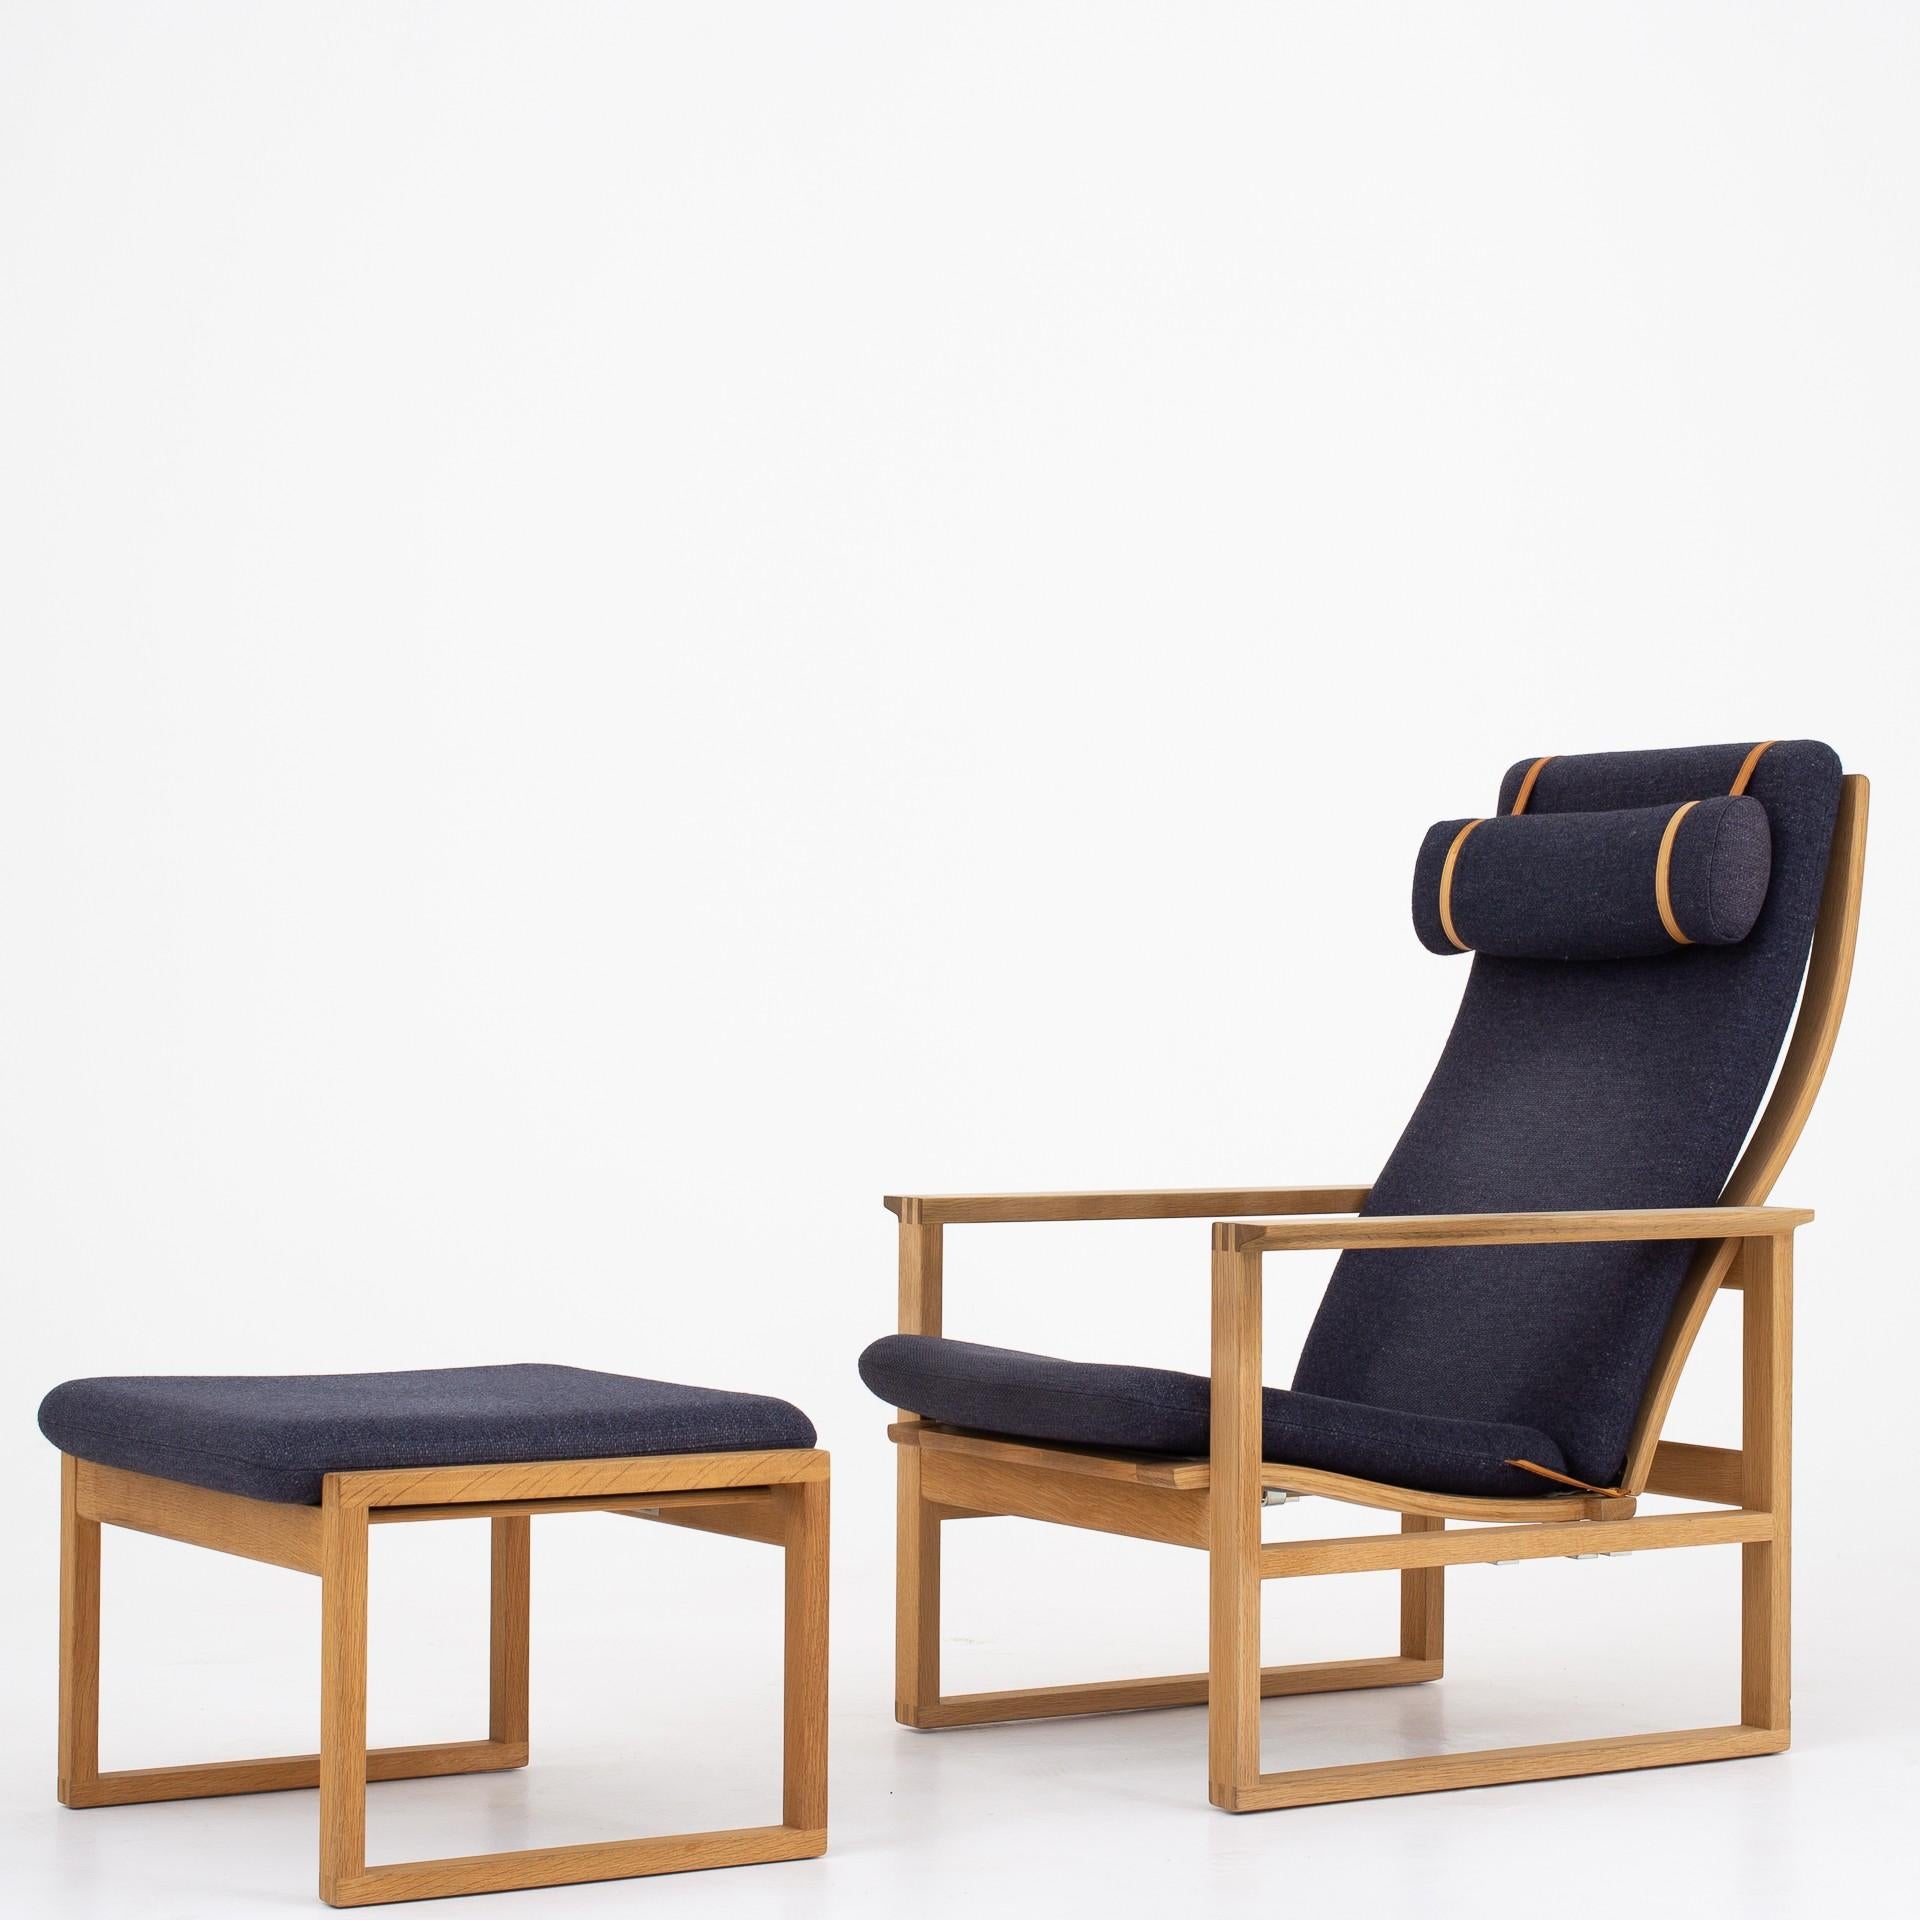 2 lounge chairs with foot stools in soaped oak and original cushions in blue wool. Maker Fredericia Furniture. Designed 1958.